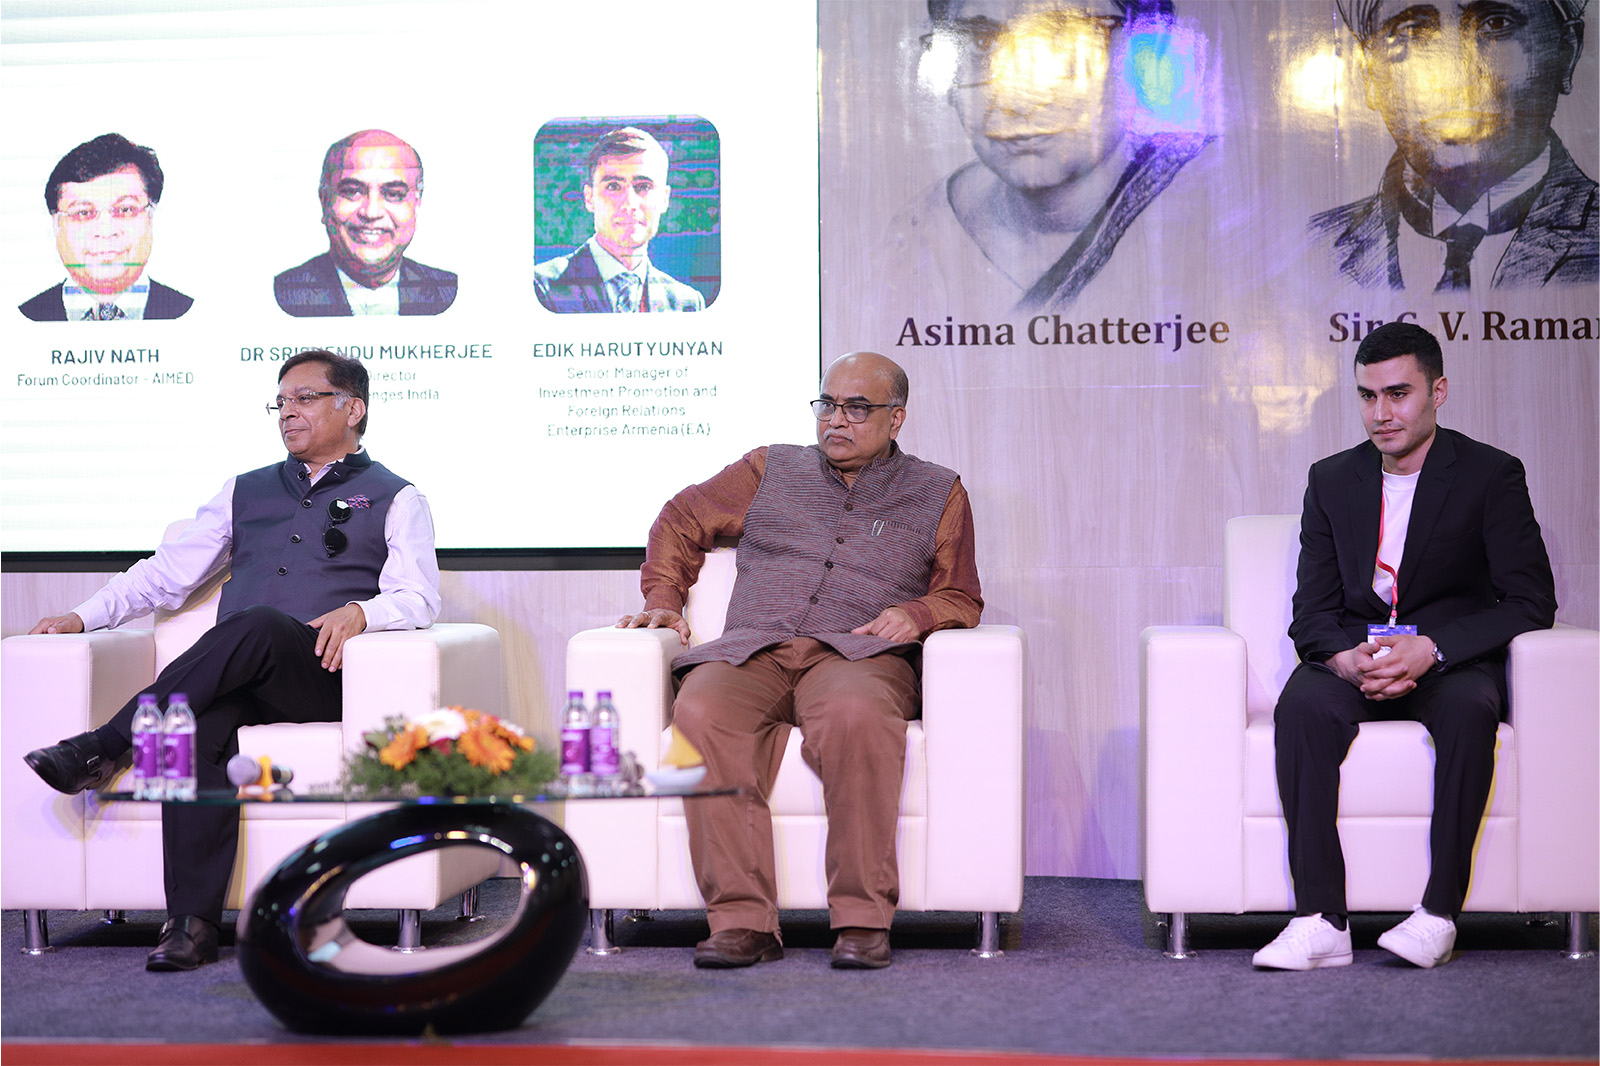 Dr. Jitendra Sharma, MD & Founder CEO, AMTZ with Dr. Shirshendu Mukherjee, Mission Director, Grand Challenges India, & HaKob during the inauguration of STARTUP ARMENIA FOUNDATION office at AMTZ Campus Health Care Medical Technology in India